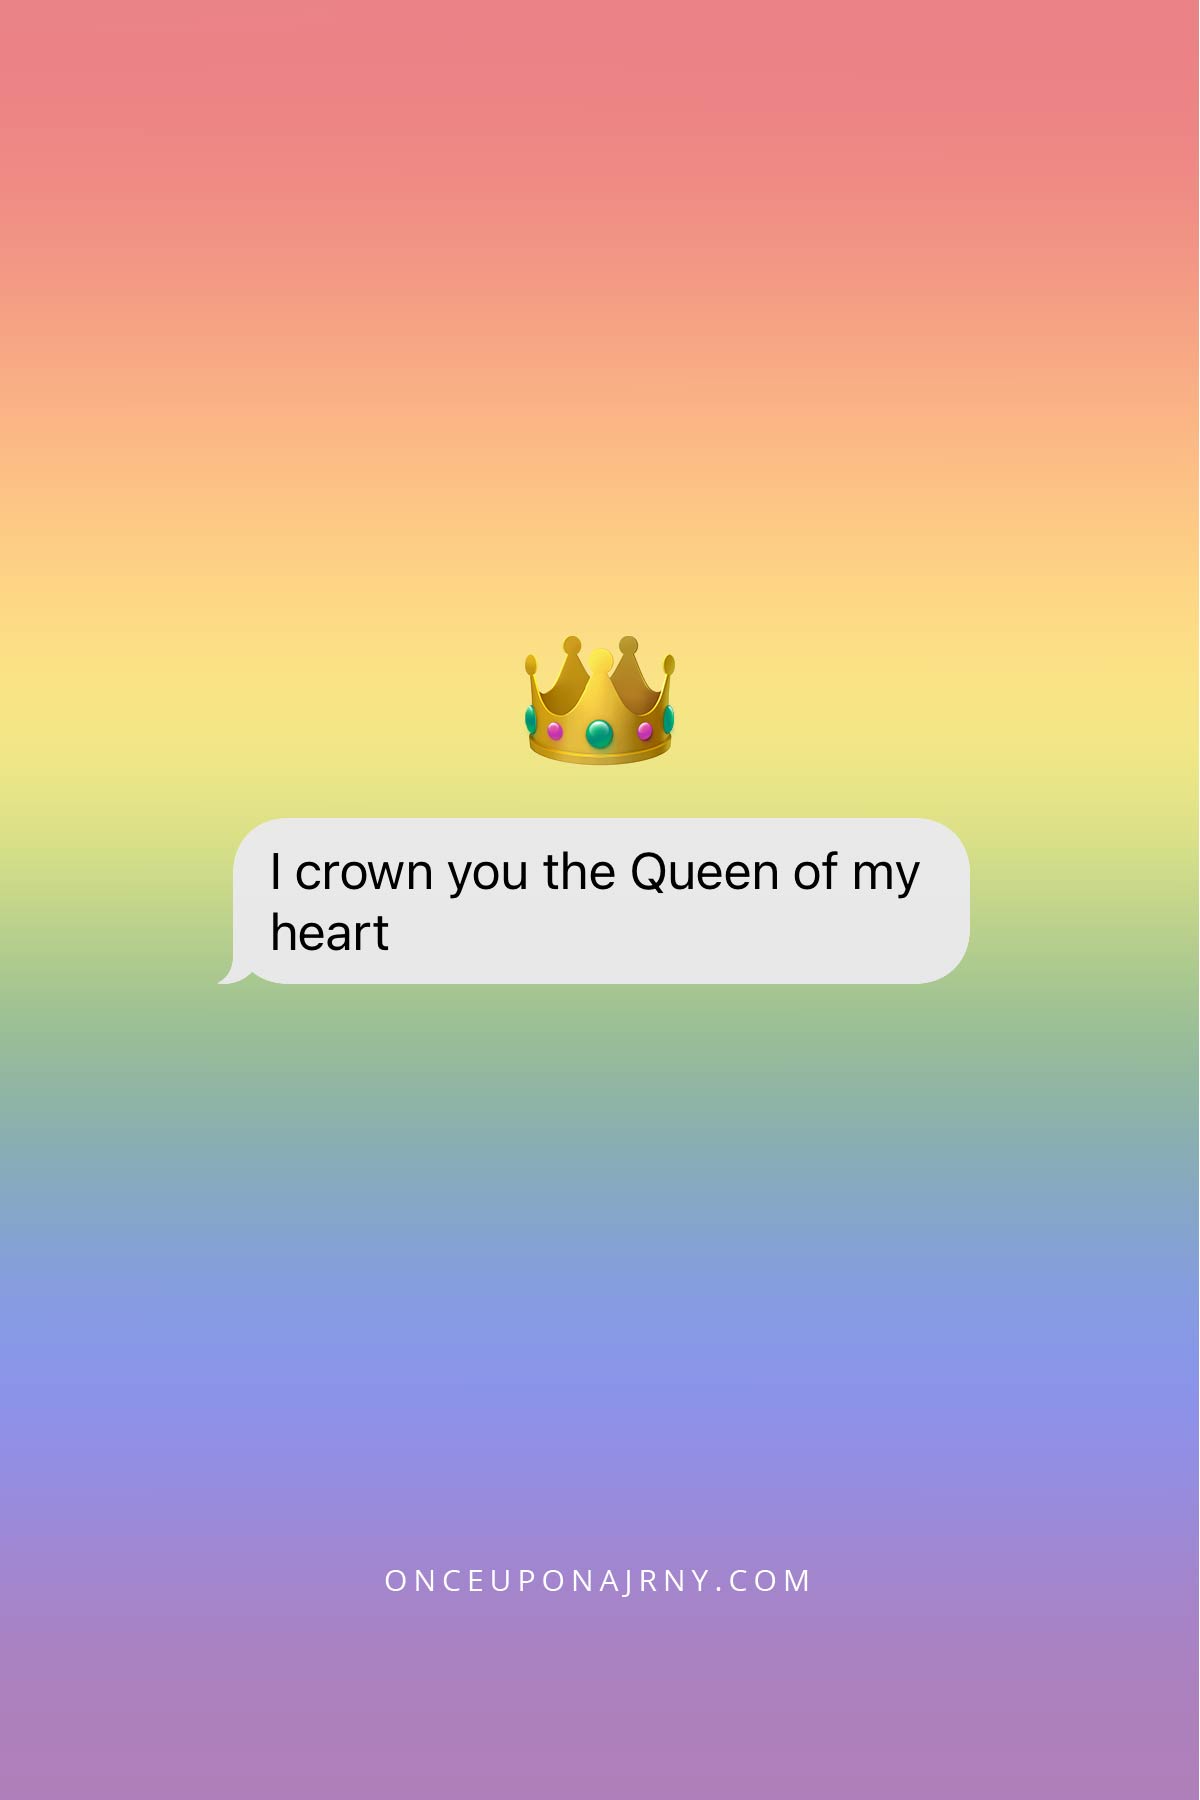 I crown you the Queen of my heart lesbians quotes